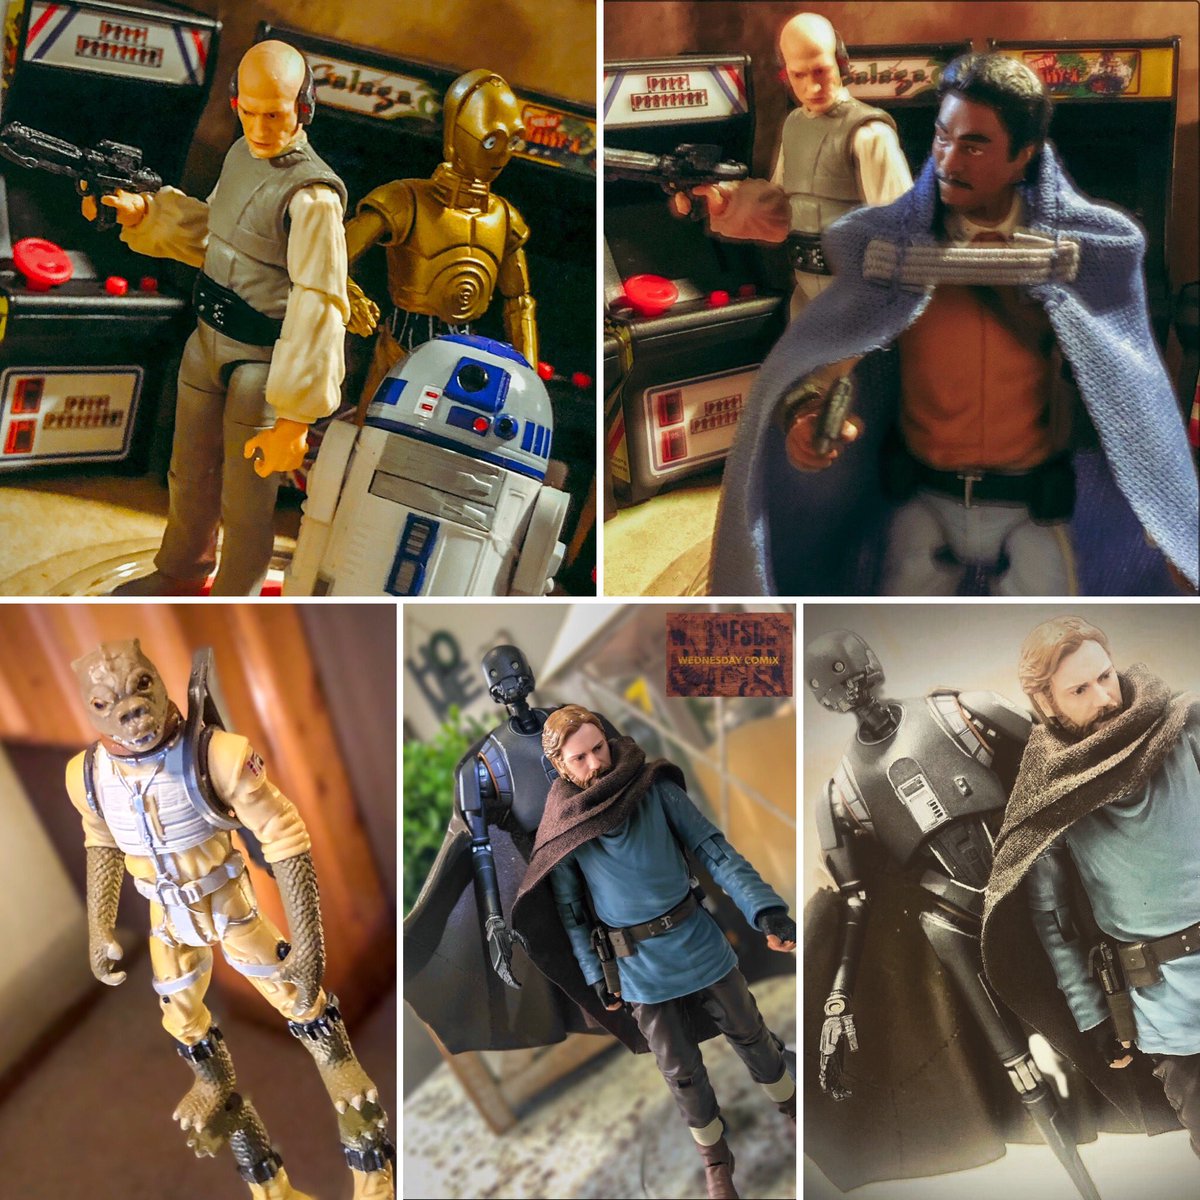 #StarWars collage incoming. Show off your most recent five toy photos from any particular franchise + hashtag #ActionFigureOneShot

#BosskDay #BosskSet #JawnyYutaw #StarWarsDiorama #SwampThingTWD